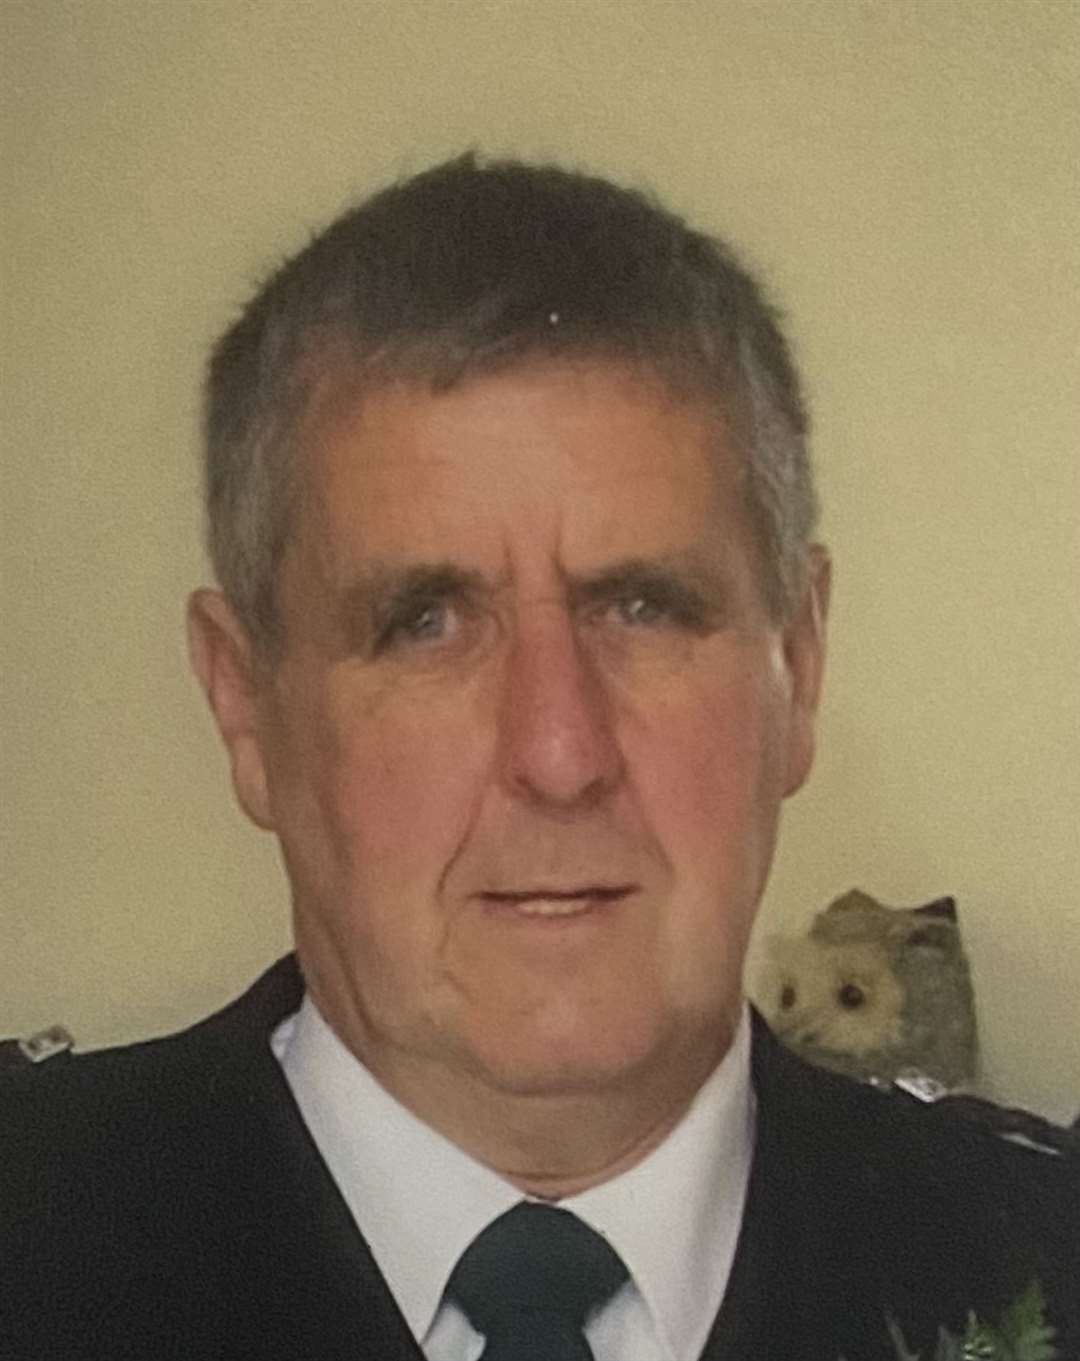 Angus Ross died after being struck by a motorcycle on the A836 near Invershin.